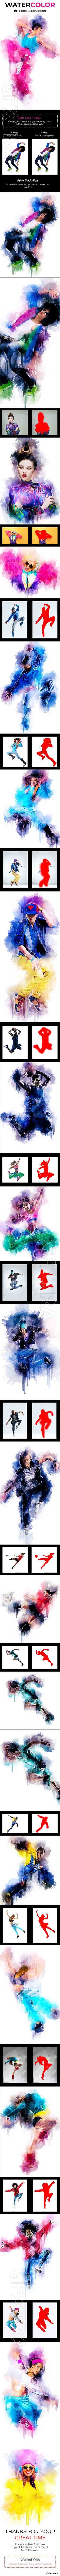 GraphicRiver - Watercolor Ink Photoshop Action 21189387